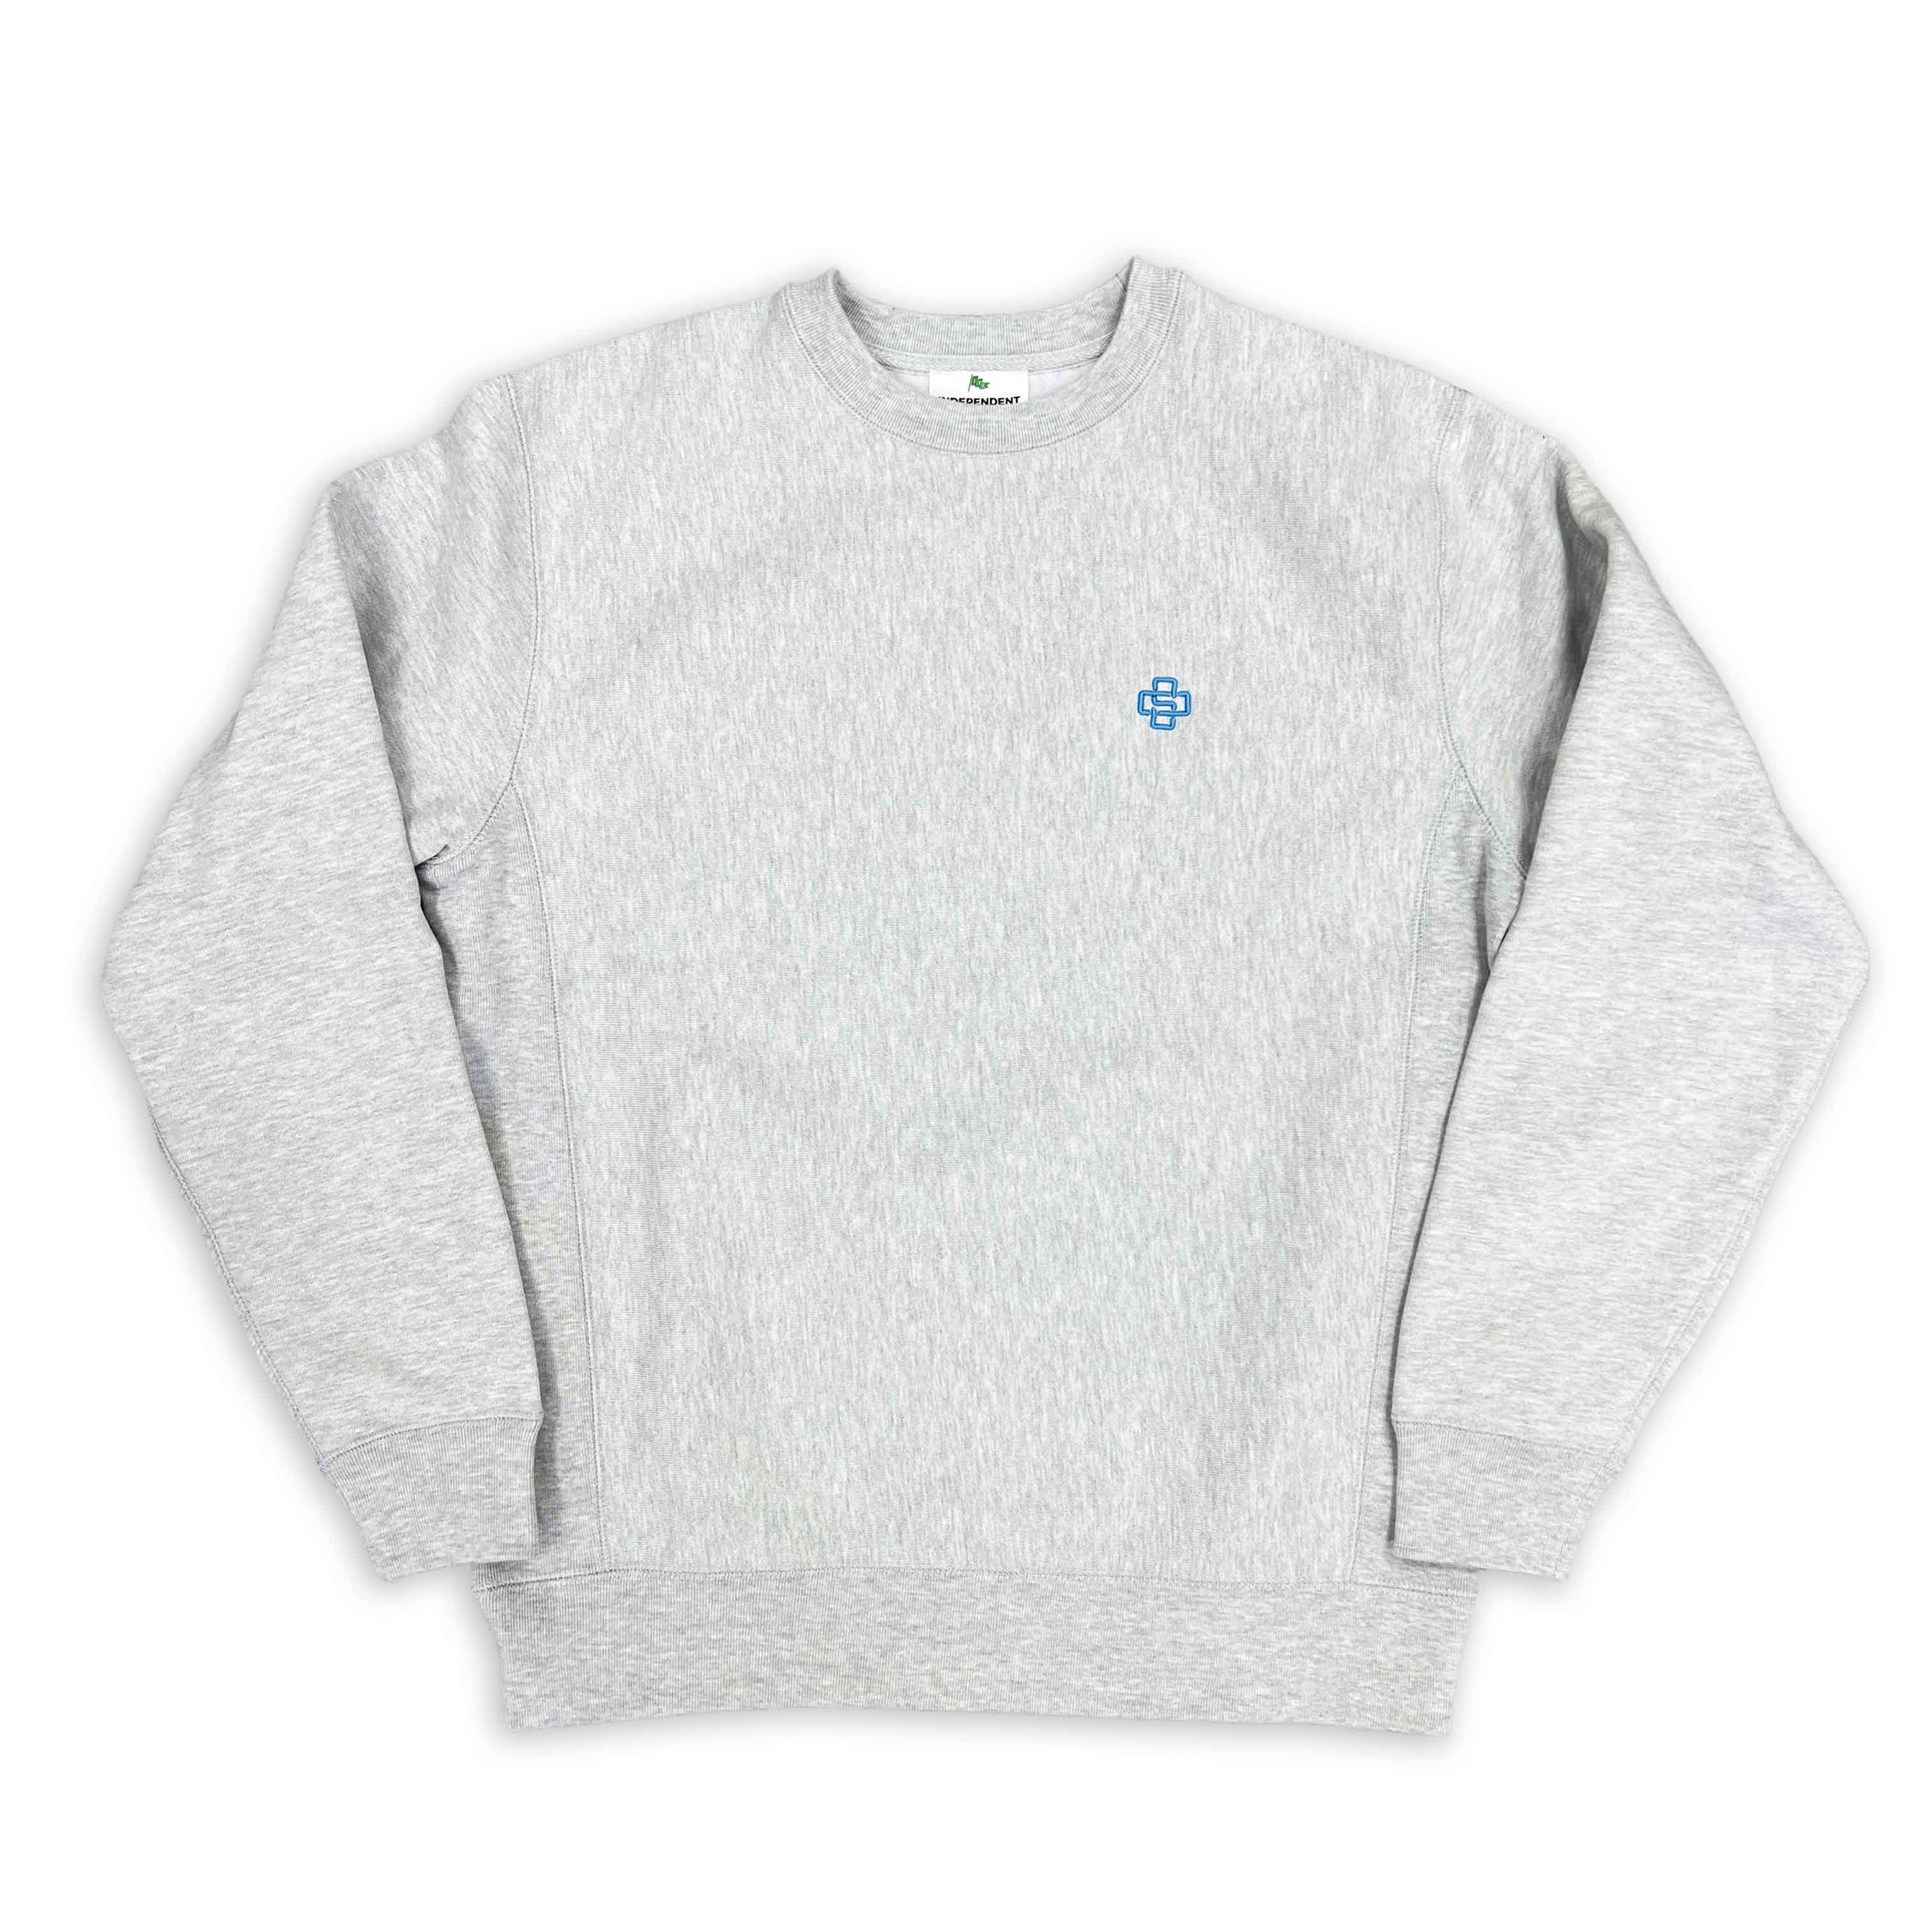 Soled Out Crewneck Sweater "SO+" Grey New Size L